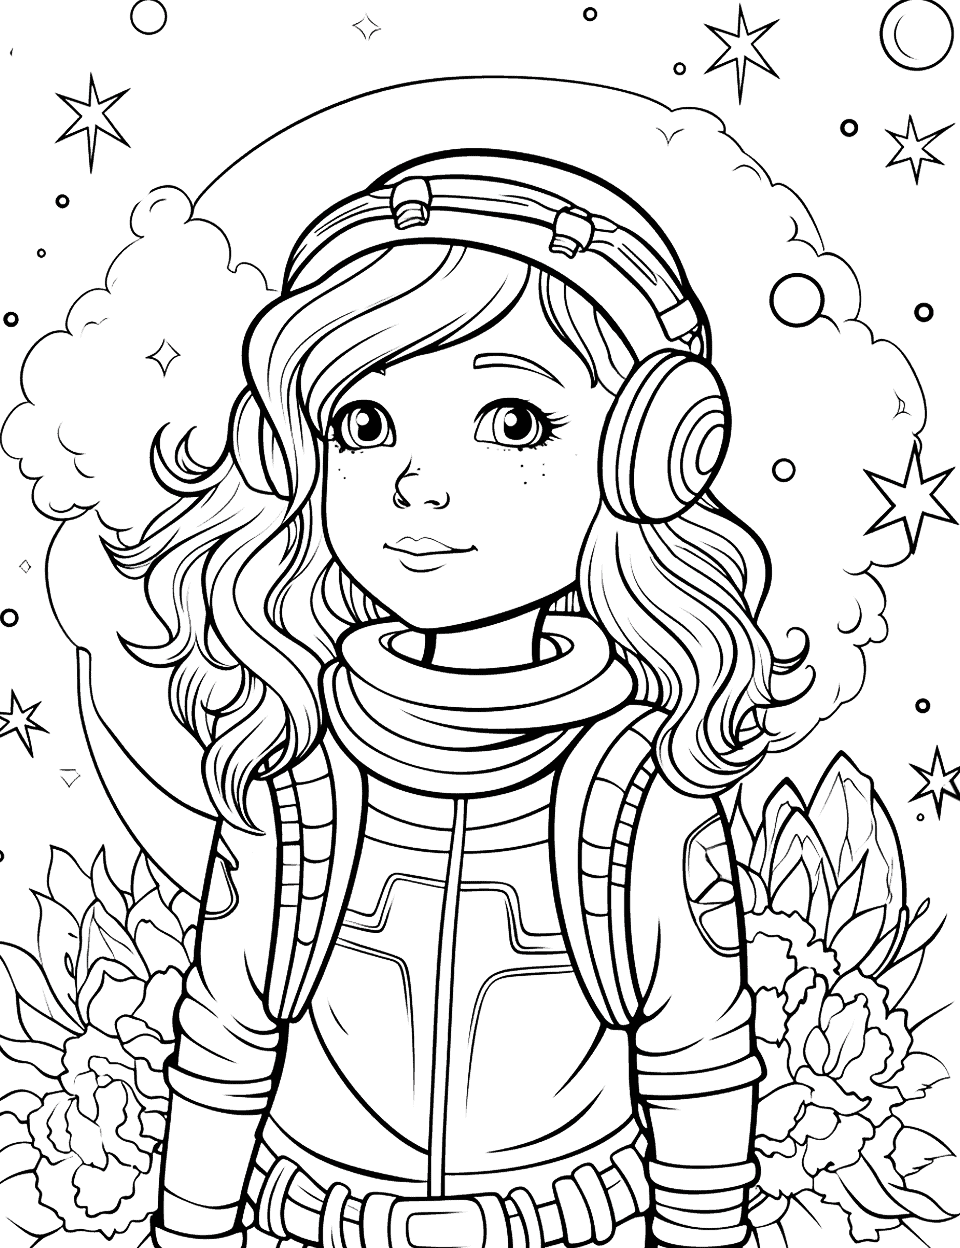 Galaxy Girl Adventure Adult Coloring Page - A girl having an adventure in space.